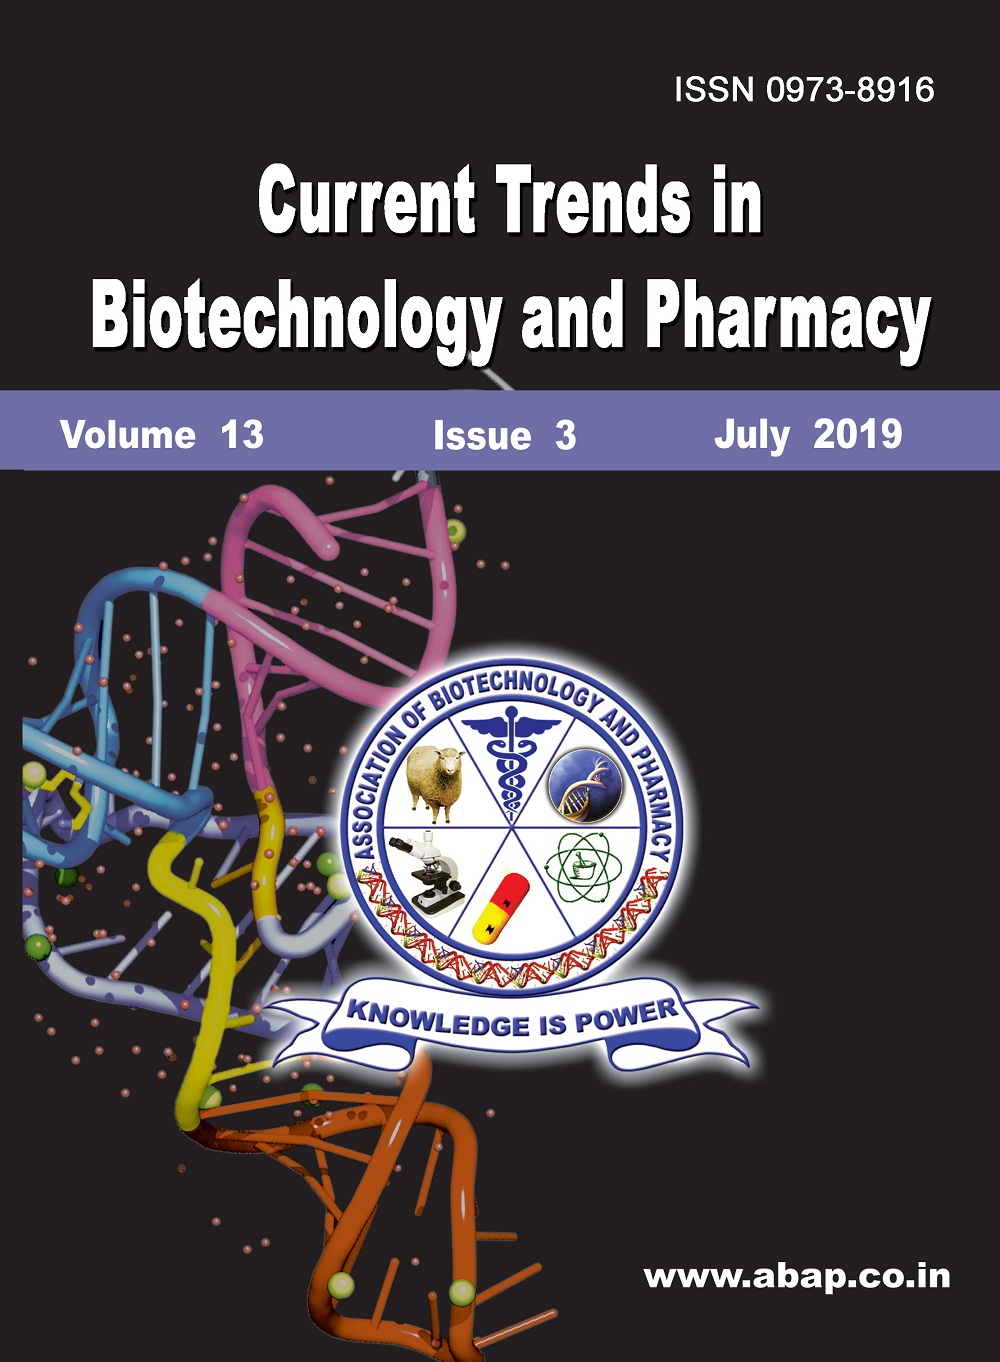 Current Trends in Biotechnology and Pharmacy Impact Factor, Indexing